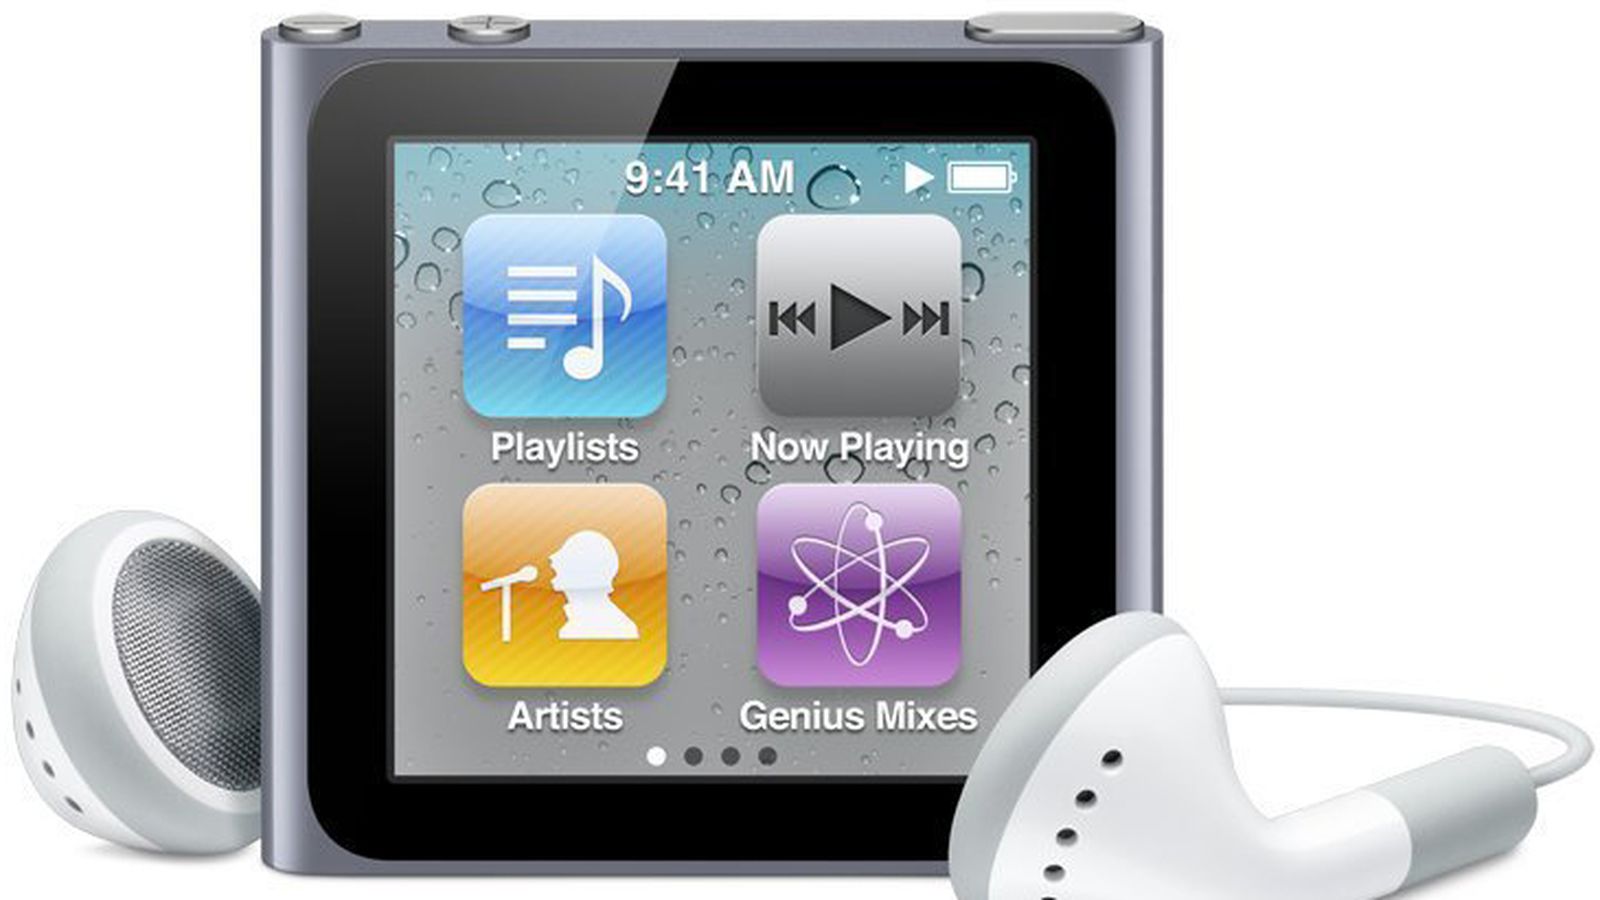 Apple's Watch-Sized iPod Nano is Officially Obsolete - MacRumors